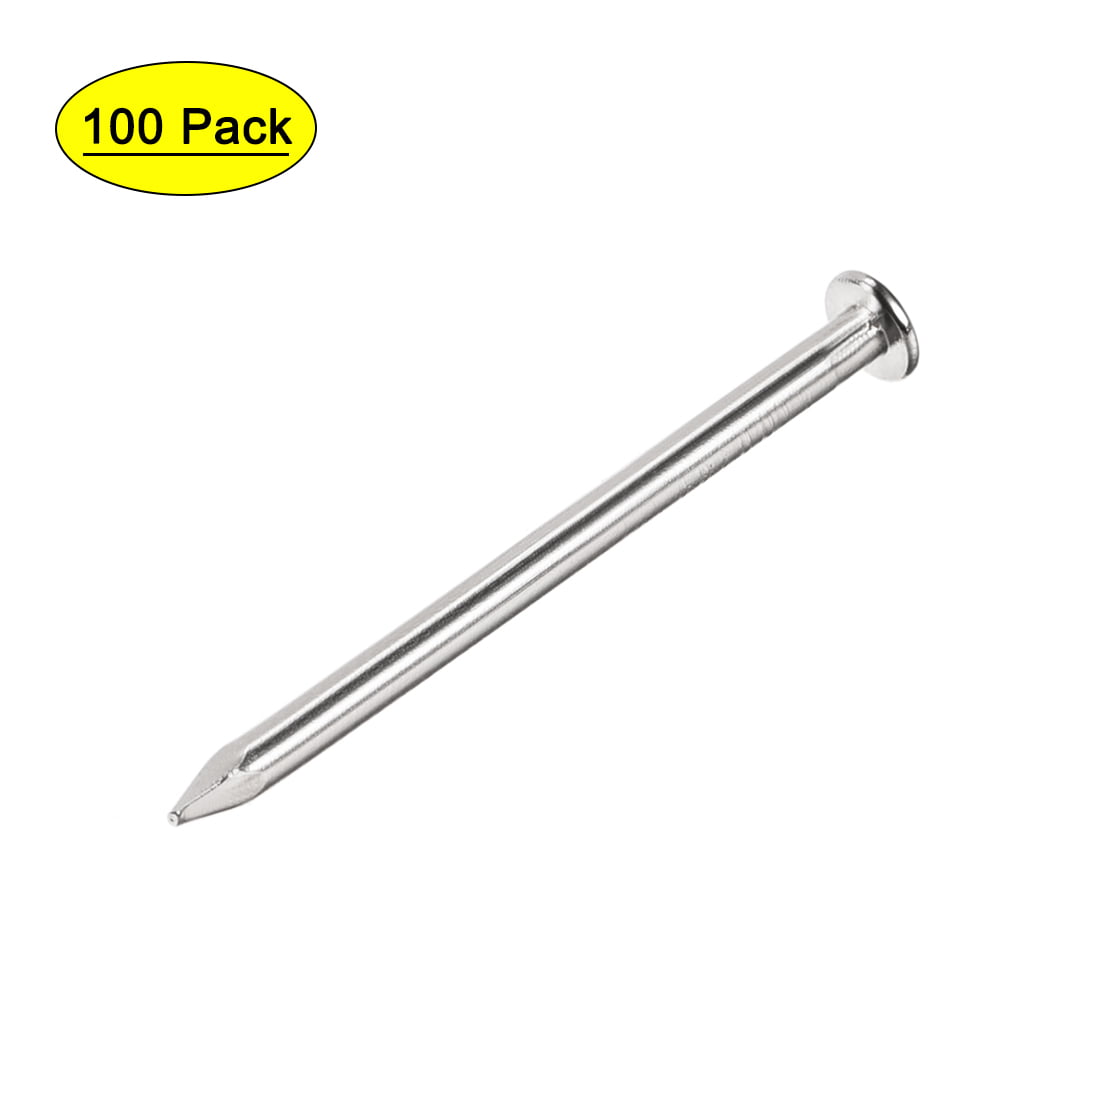 5,000/Box Spotnails 18512SS-316 3/4 in 316 Stainless Steel 18 Gauge AX Style Brads